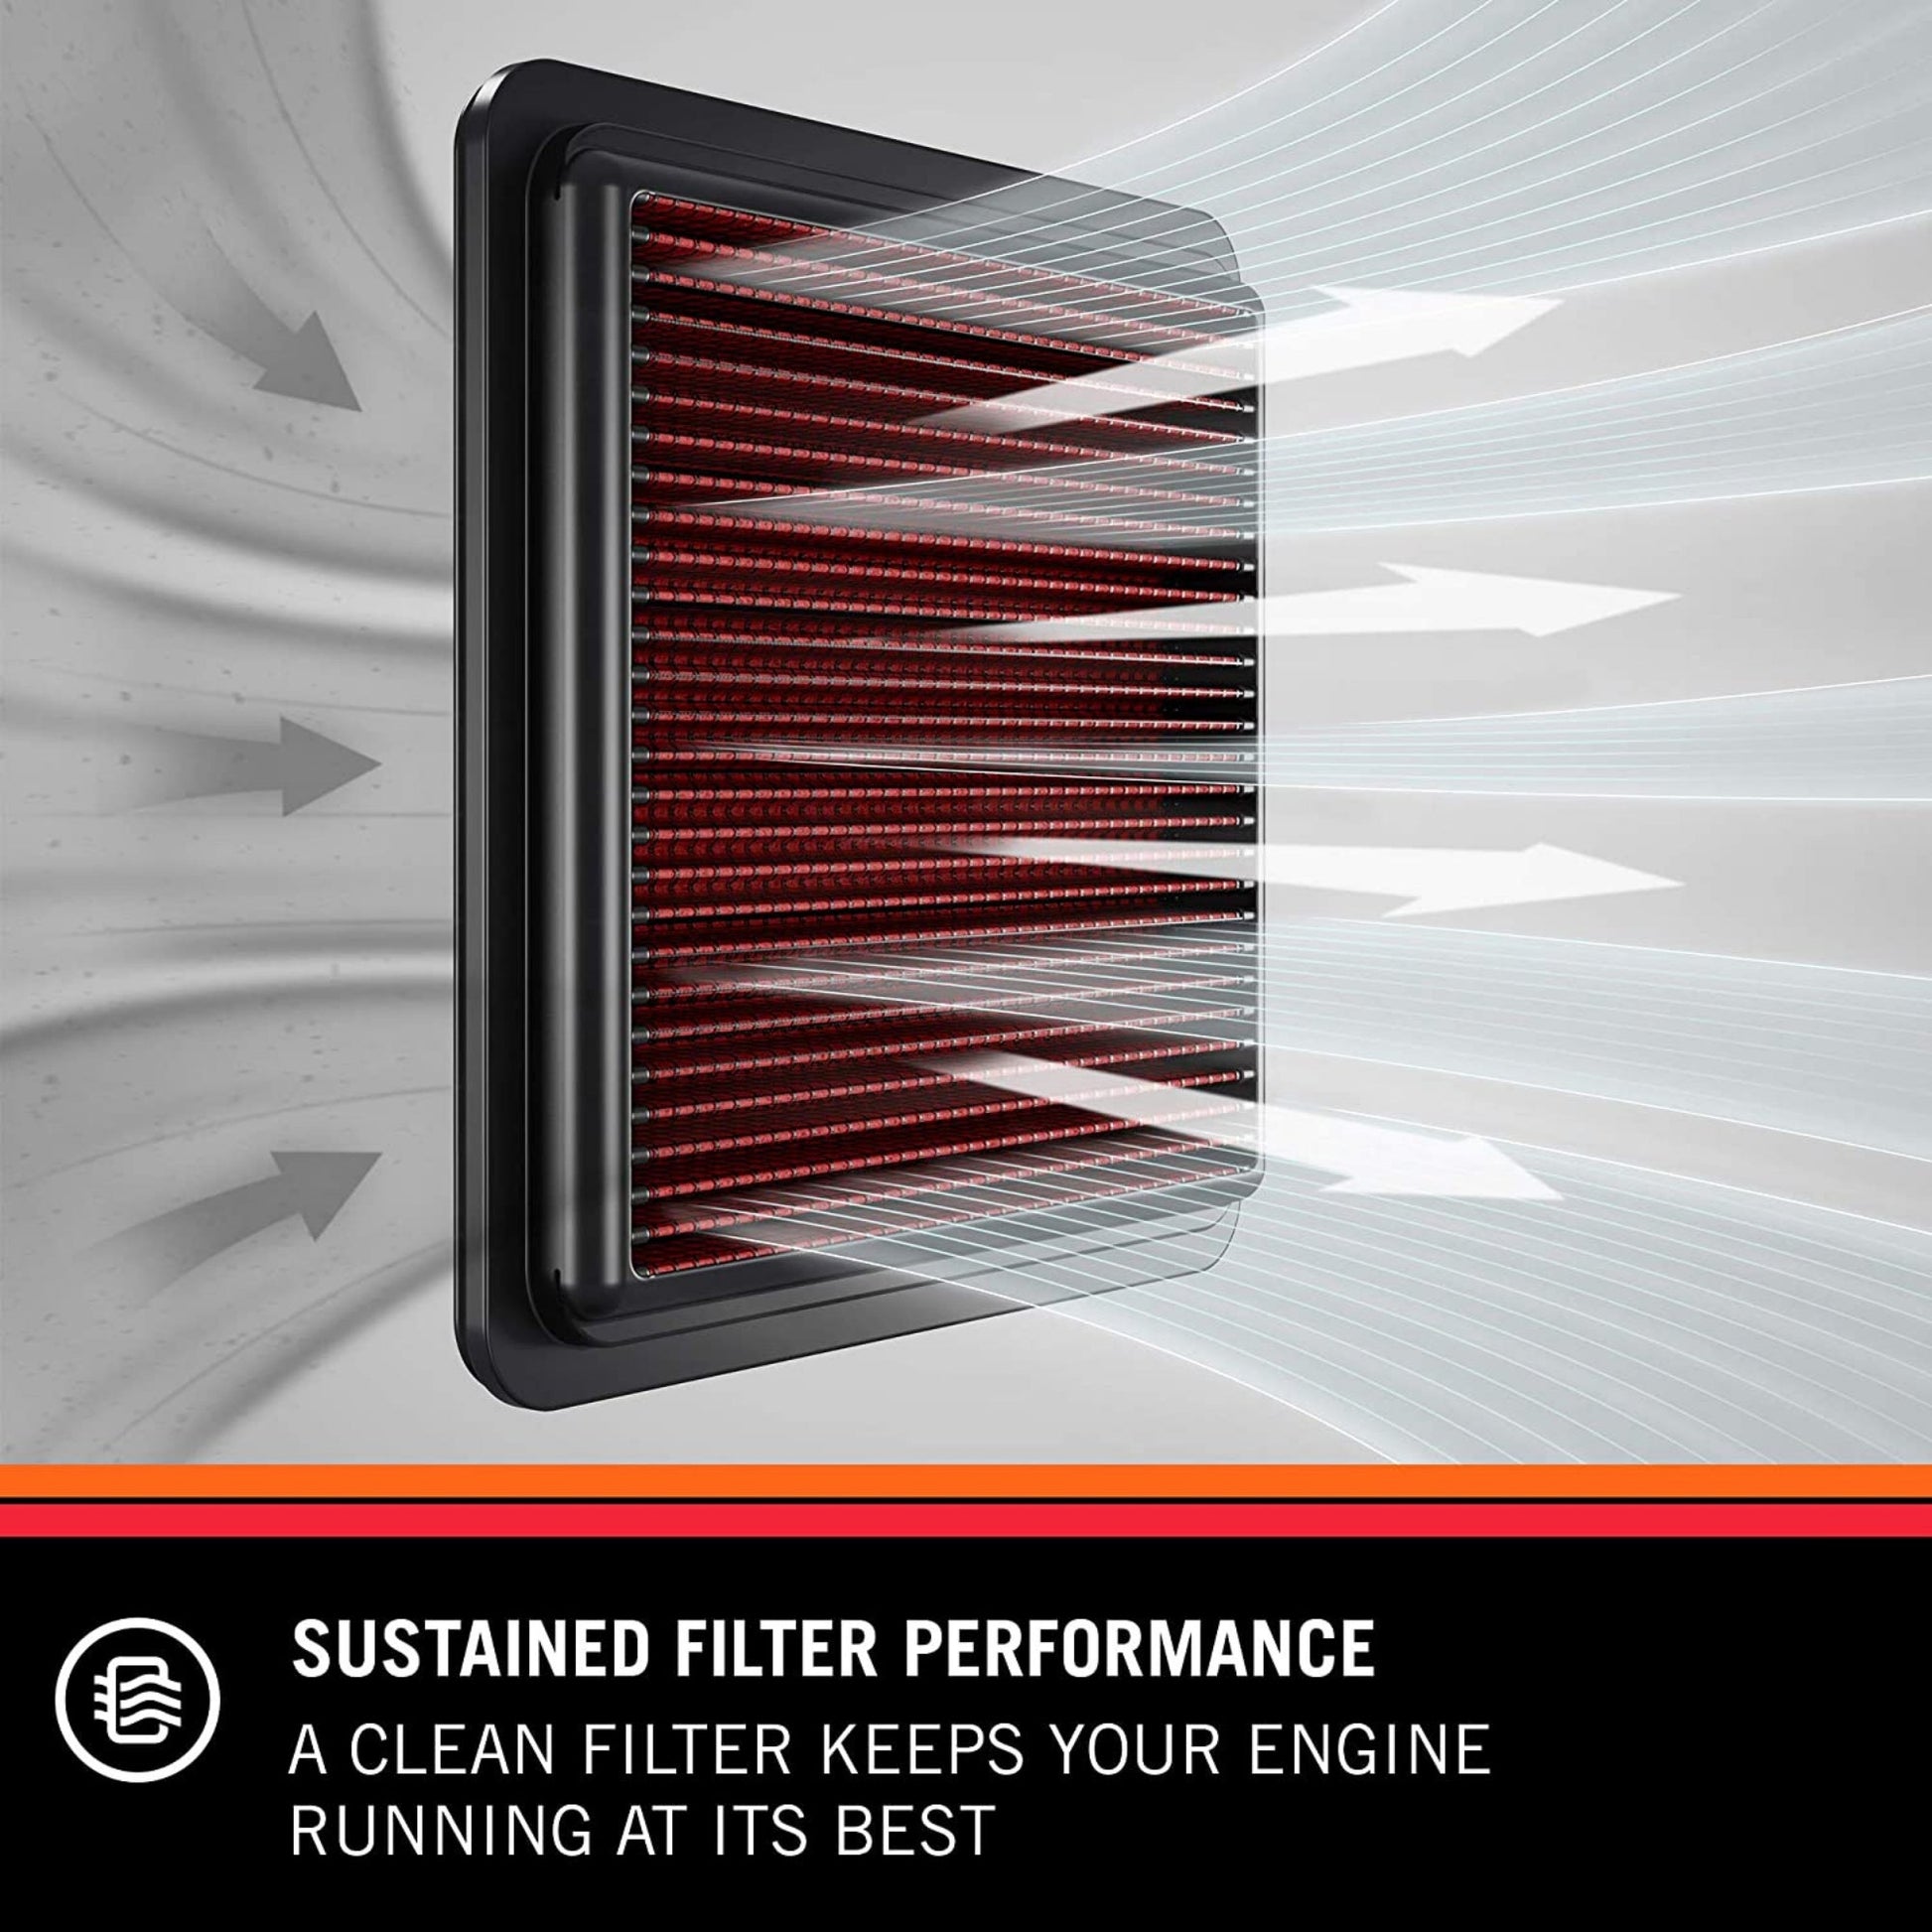  K&N Air Filter Cleaner and Degreaser: Power Kleen; 12 Oz Spray  Bottle; Restore Engine Air Filter Performance, 99-0606 : Automotive